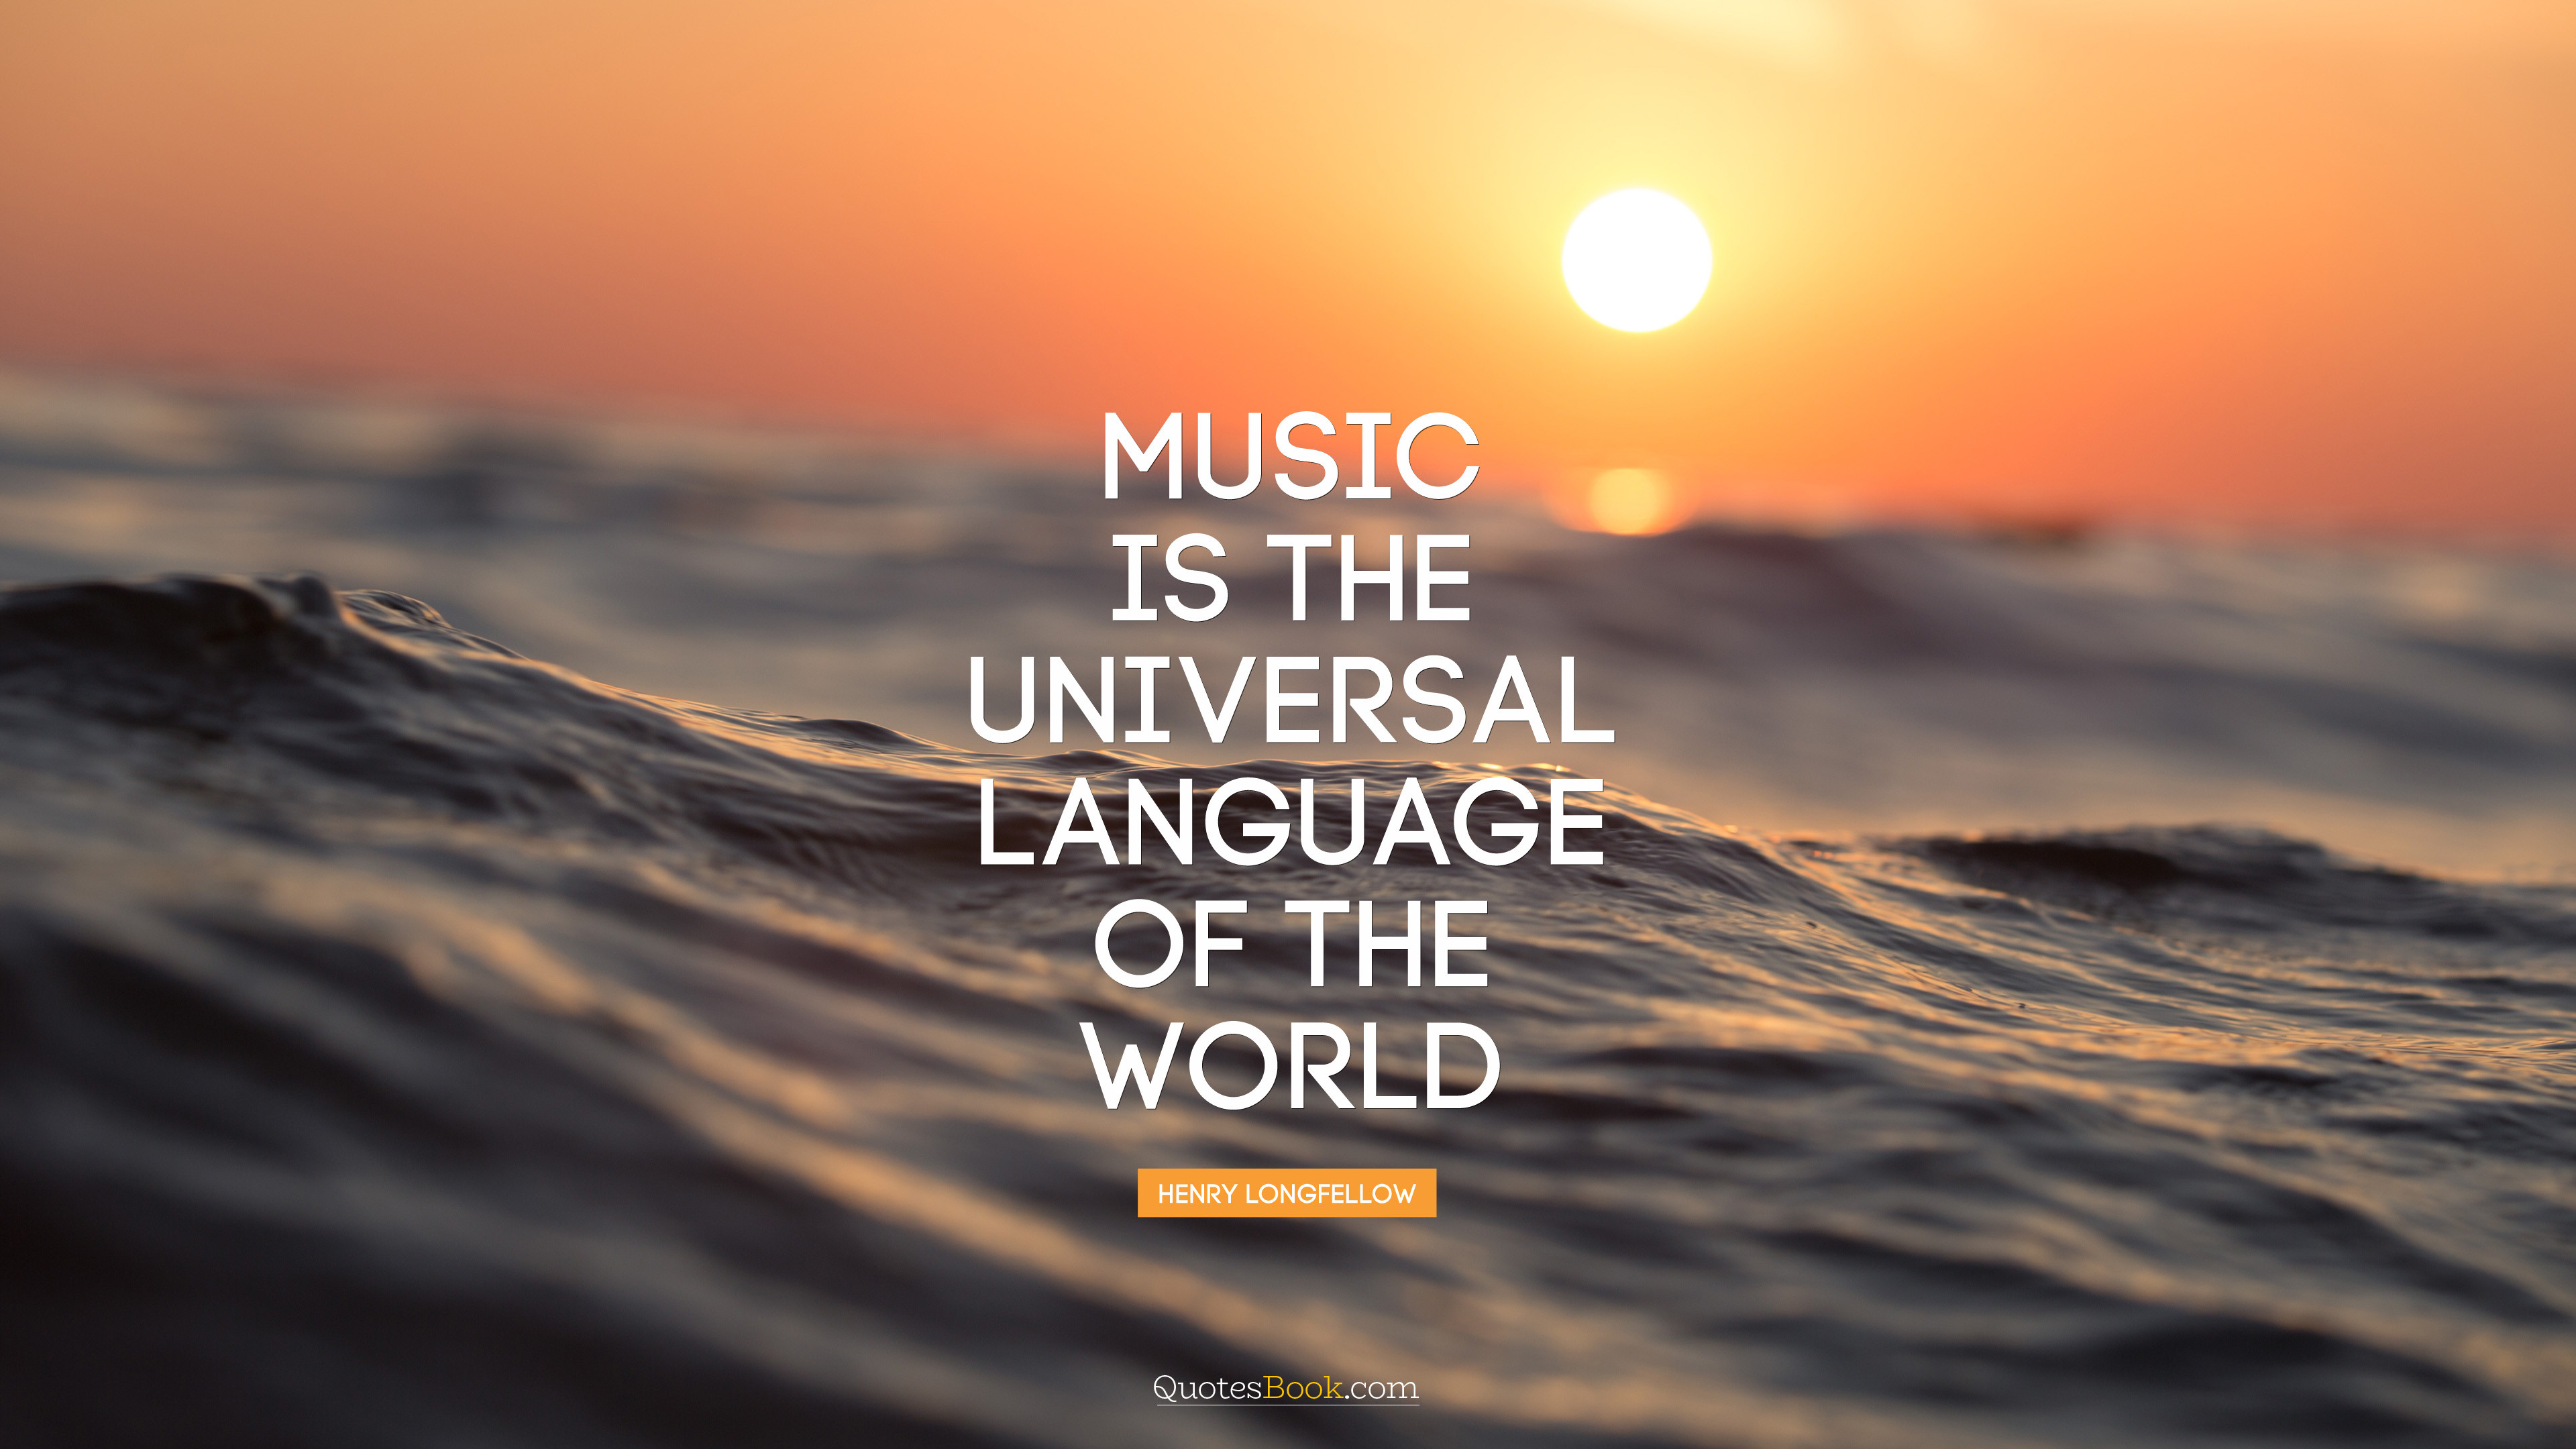 Music is the universal language of the world. - Quote by Henry